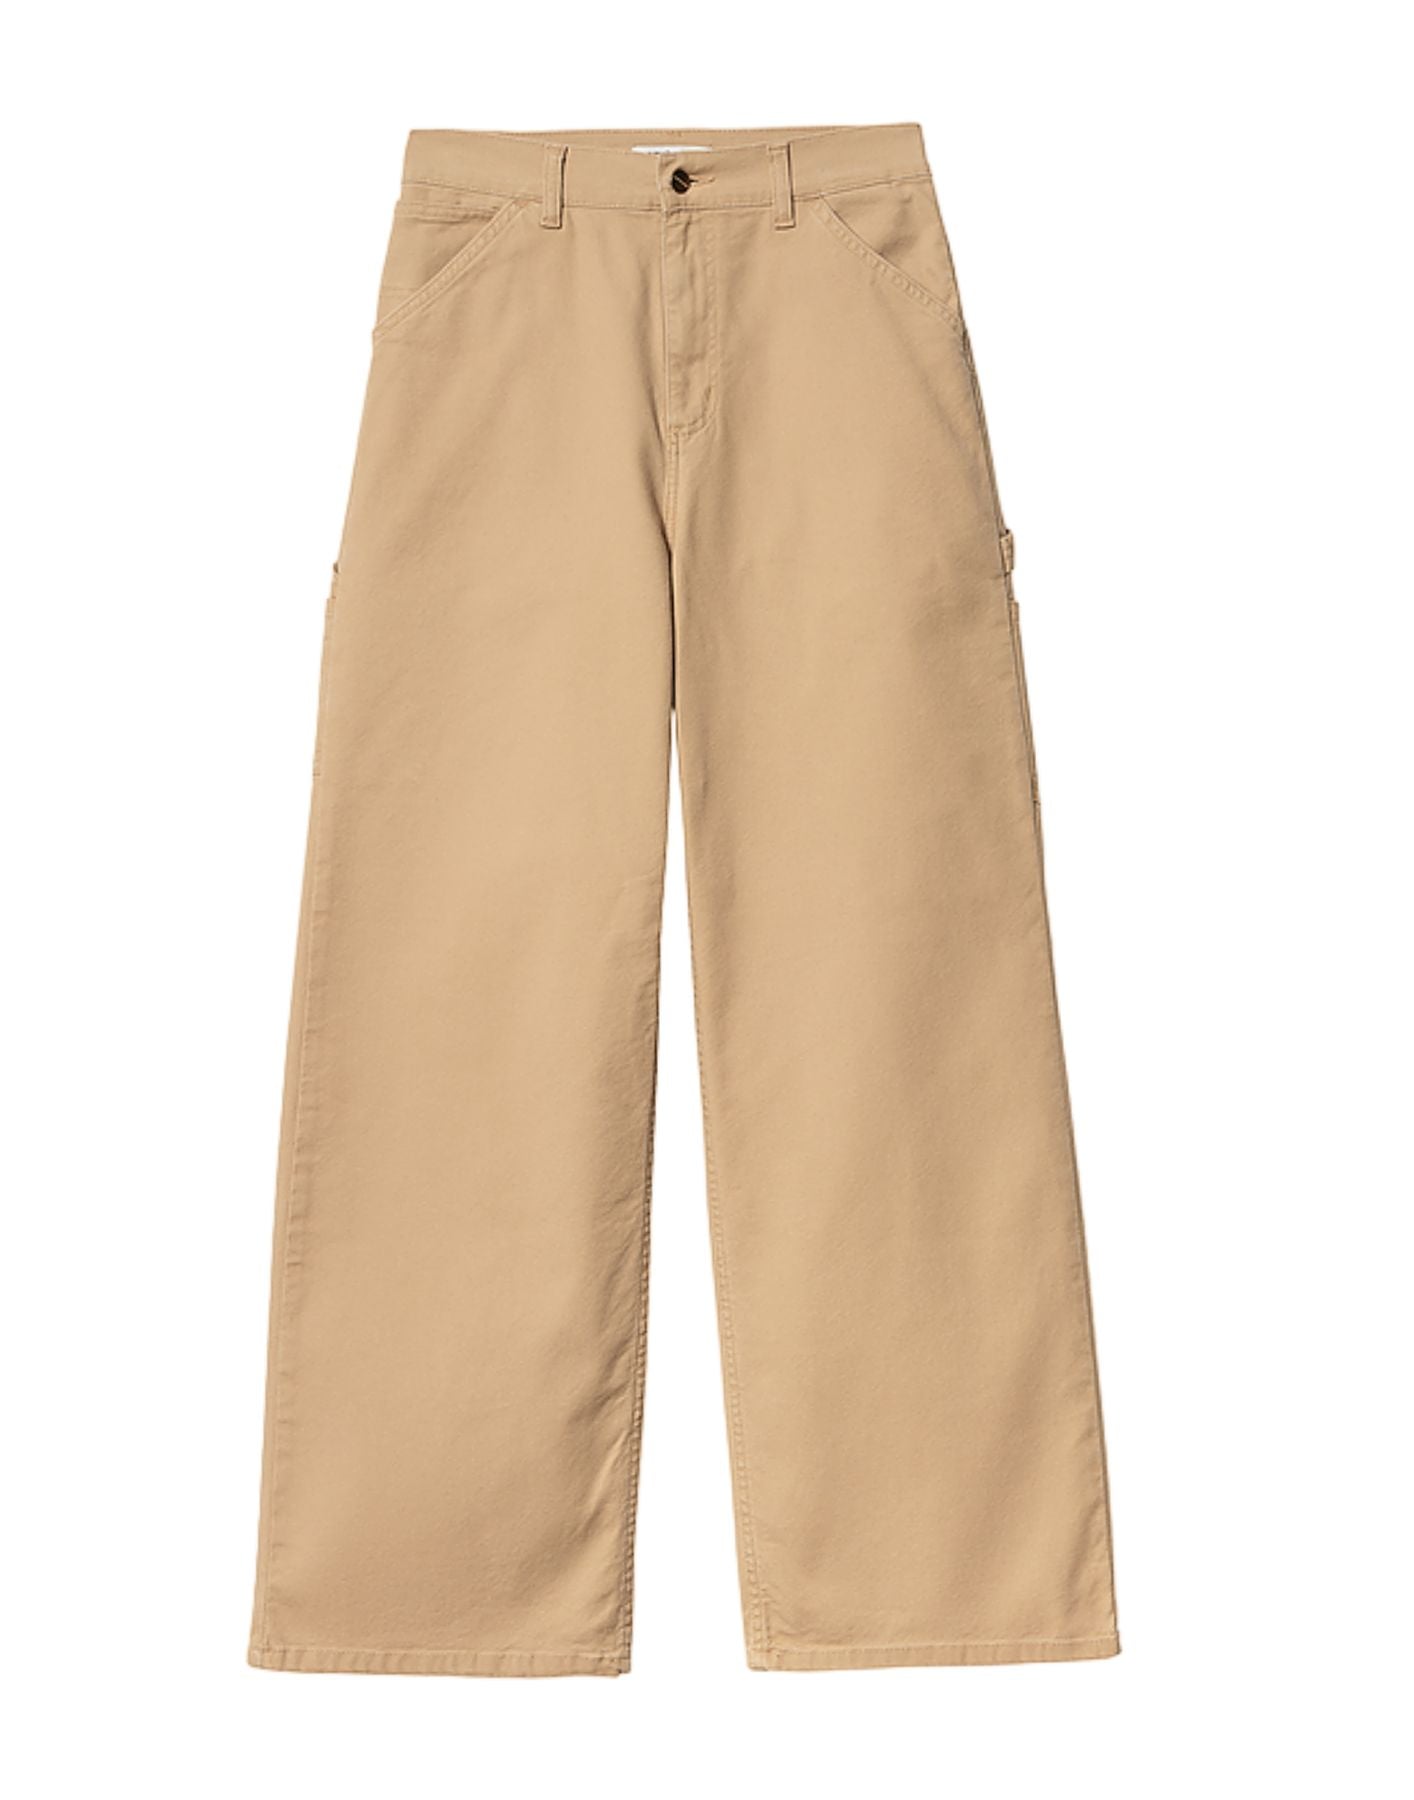 Pants for woman I032257 DUSTY BROWN CARHARTT WIP